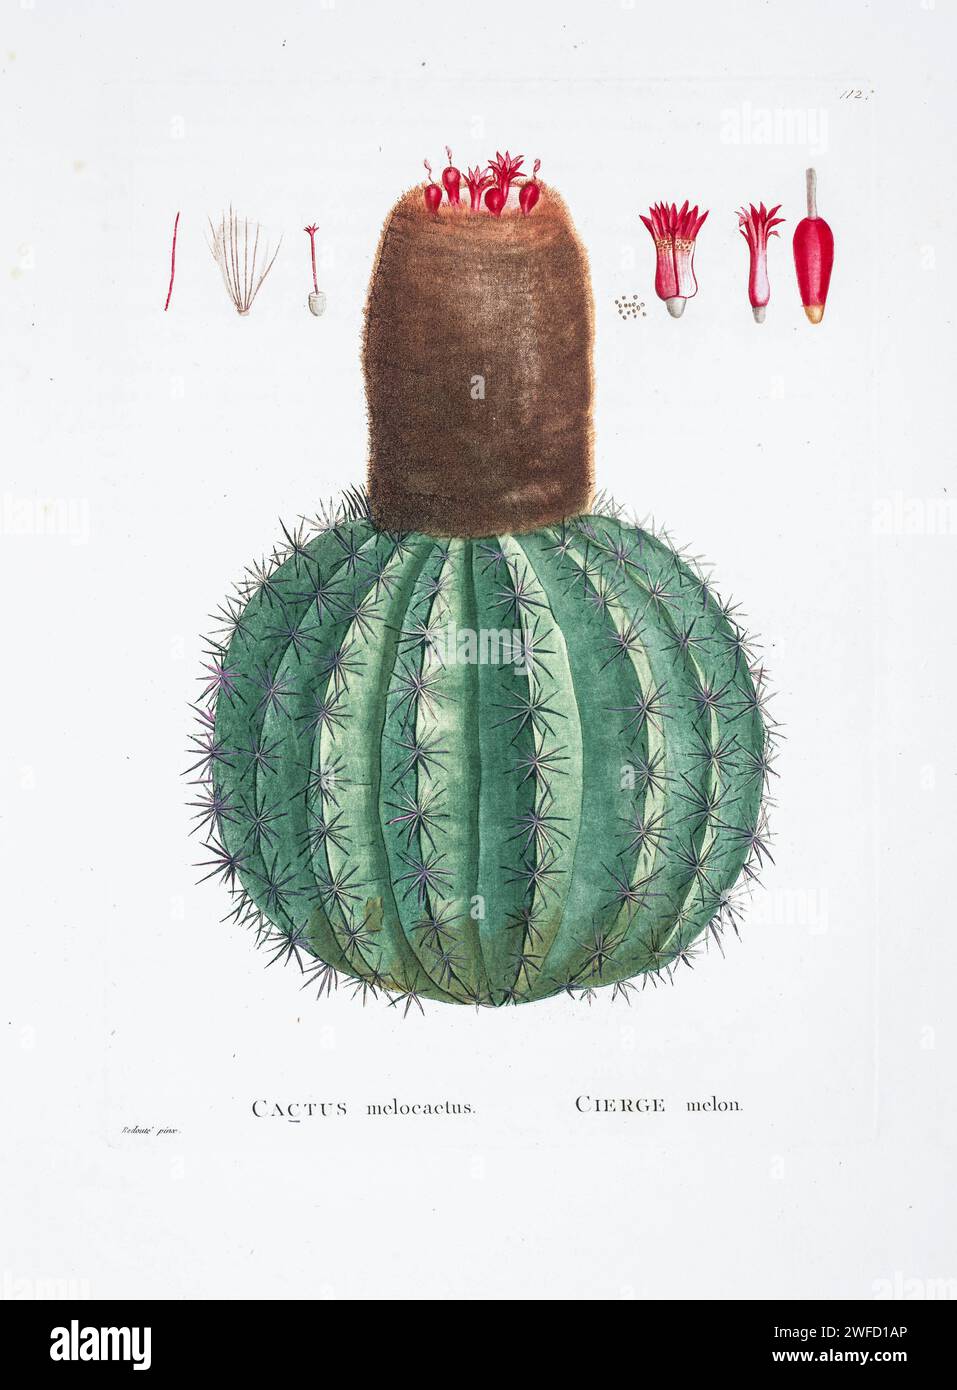 Melocactus communis Here As Cactus melocactus from History of Succulent Plants [Plantarum historia succulentarum / Histoire des plantes grasses] painted by Pierre-Joseph Redouté and described by Augustin Pyramus de Candolle 1799 Melocactus, also known as the Turk's cap cactus, or Pope's head cactus, is a genus of cactus with about 30–40 species. They are native to the Caribbean, western Mexico through Central America to northern South America, Stock Photo